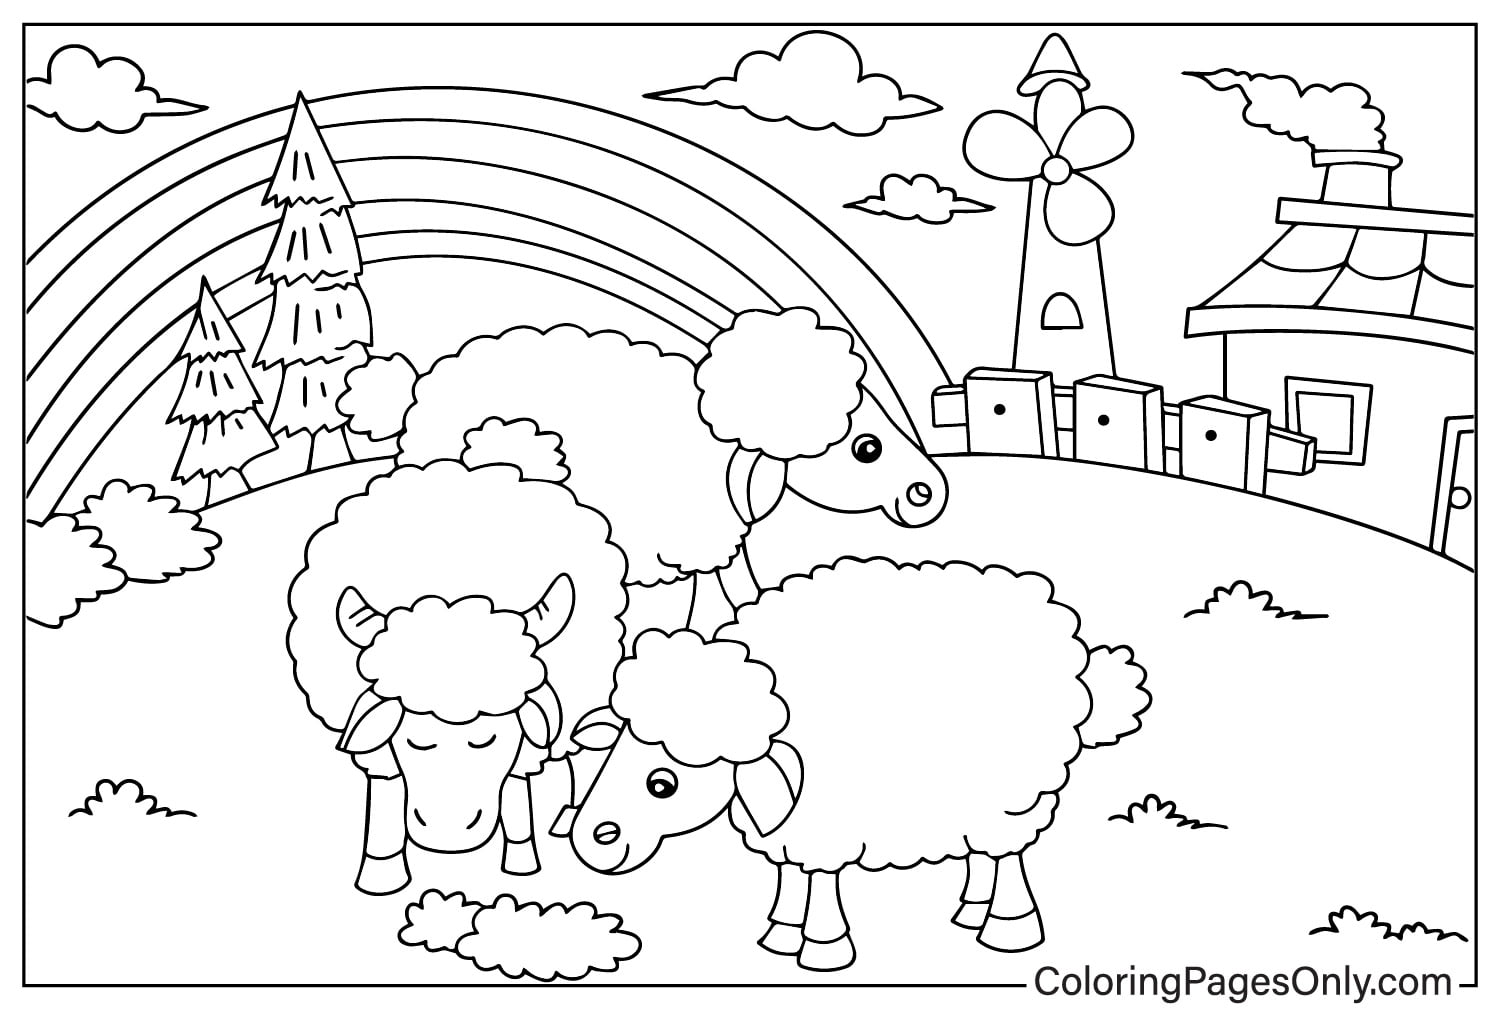 Sheep Grazing on The Farm - Free Printable Coloring Pages